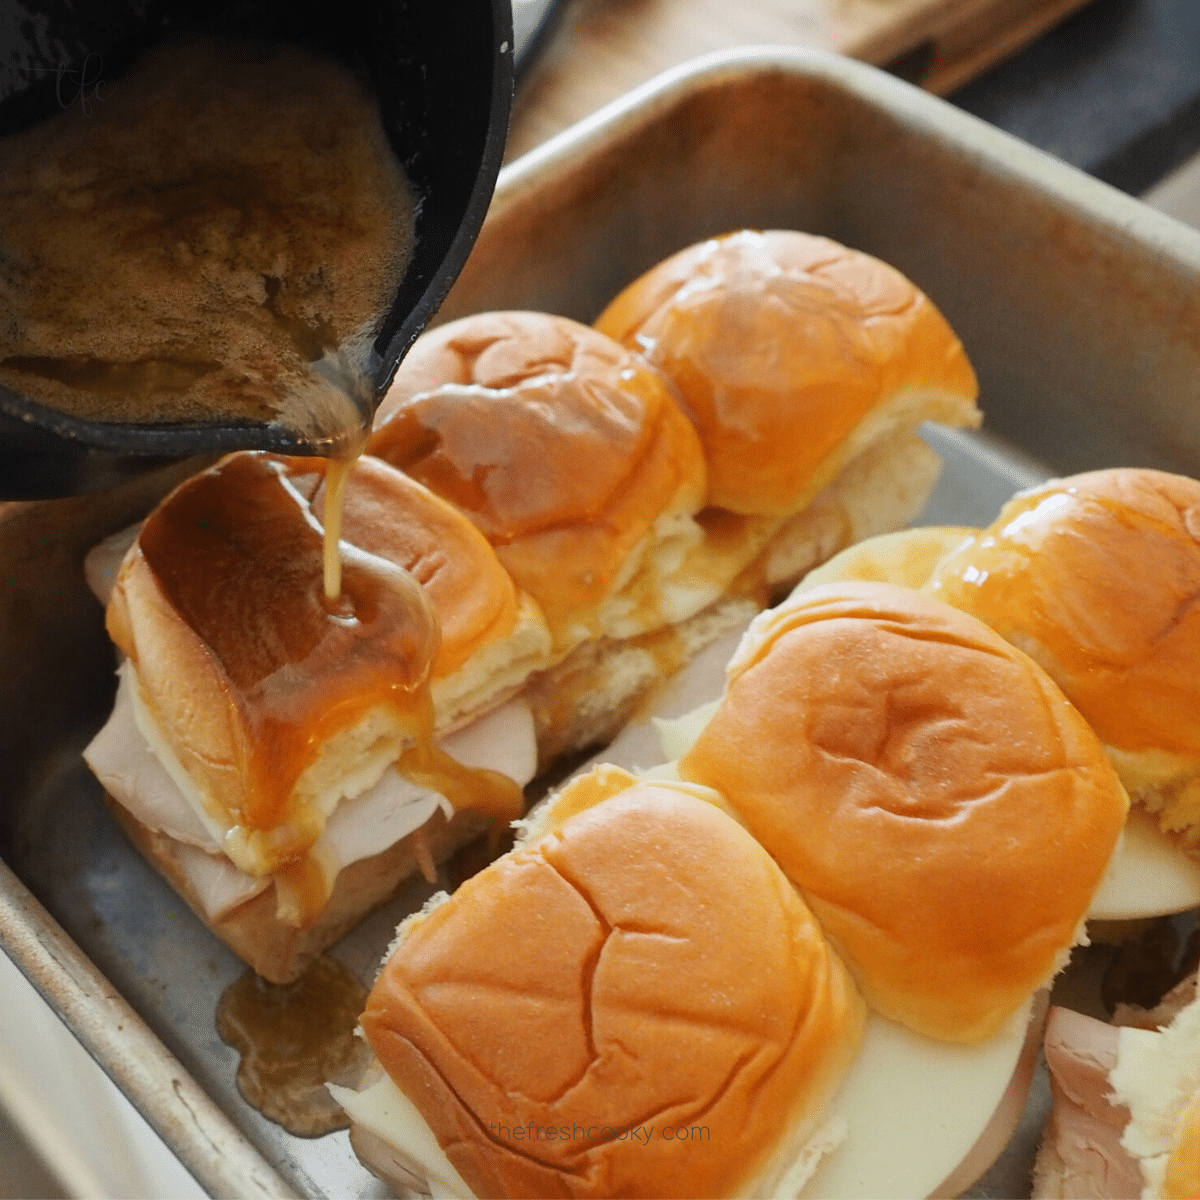 Square image of pouring marinade sauce over funeral sandwiches.